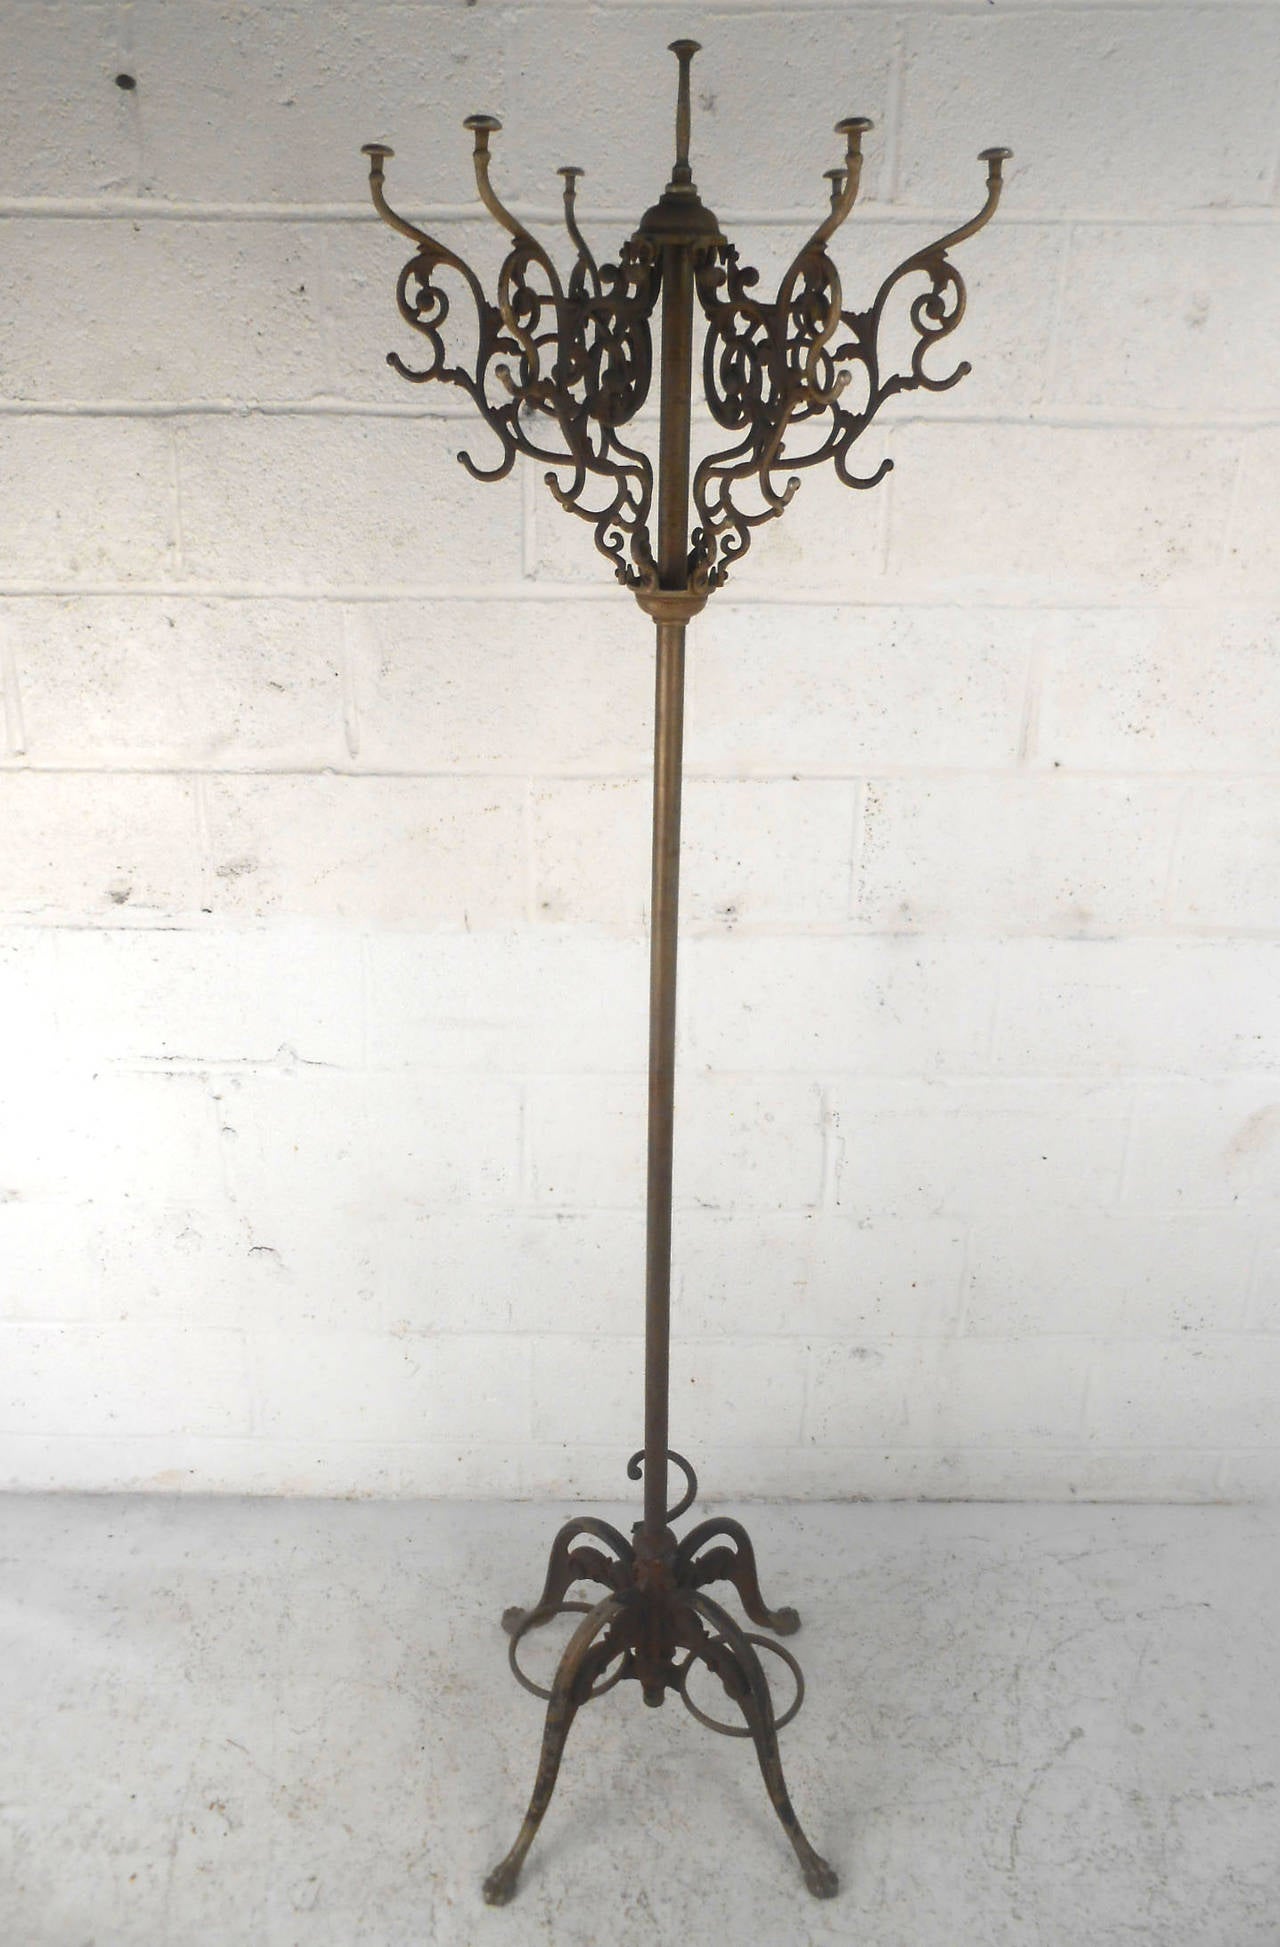 This beautiful and unique cast iron coat rack features a beautiful vintage finish, a nice mix of oxidation and age related wear for an authentic antique feel. Top rack spins, sturdy and heavy piece. Please confirm item location (NY or NJ).